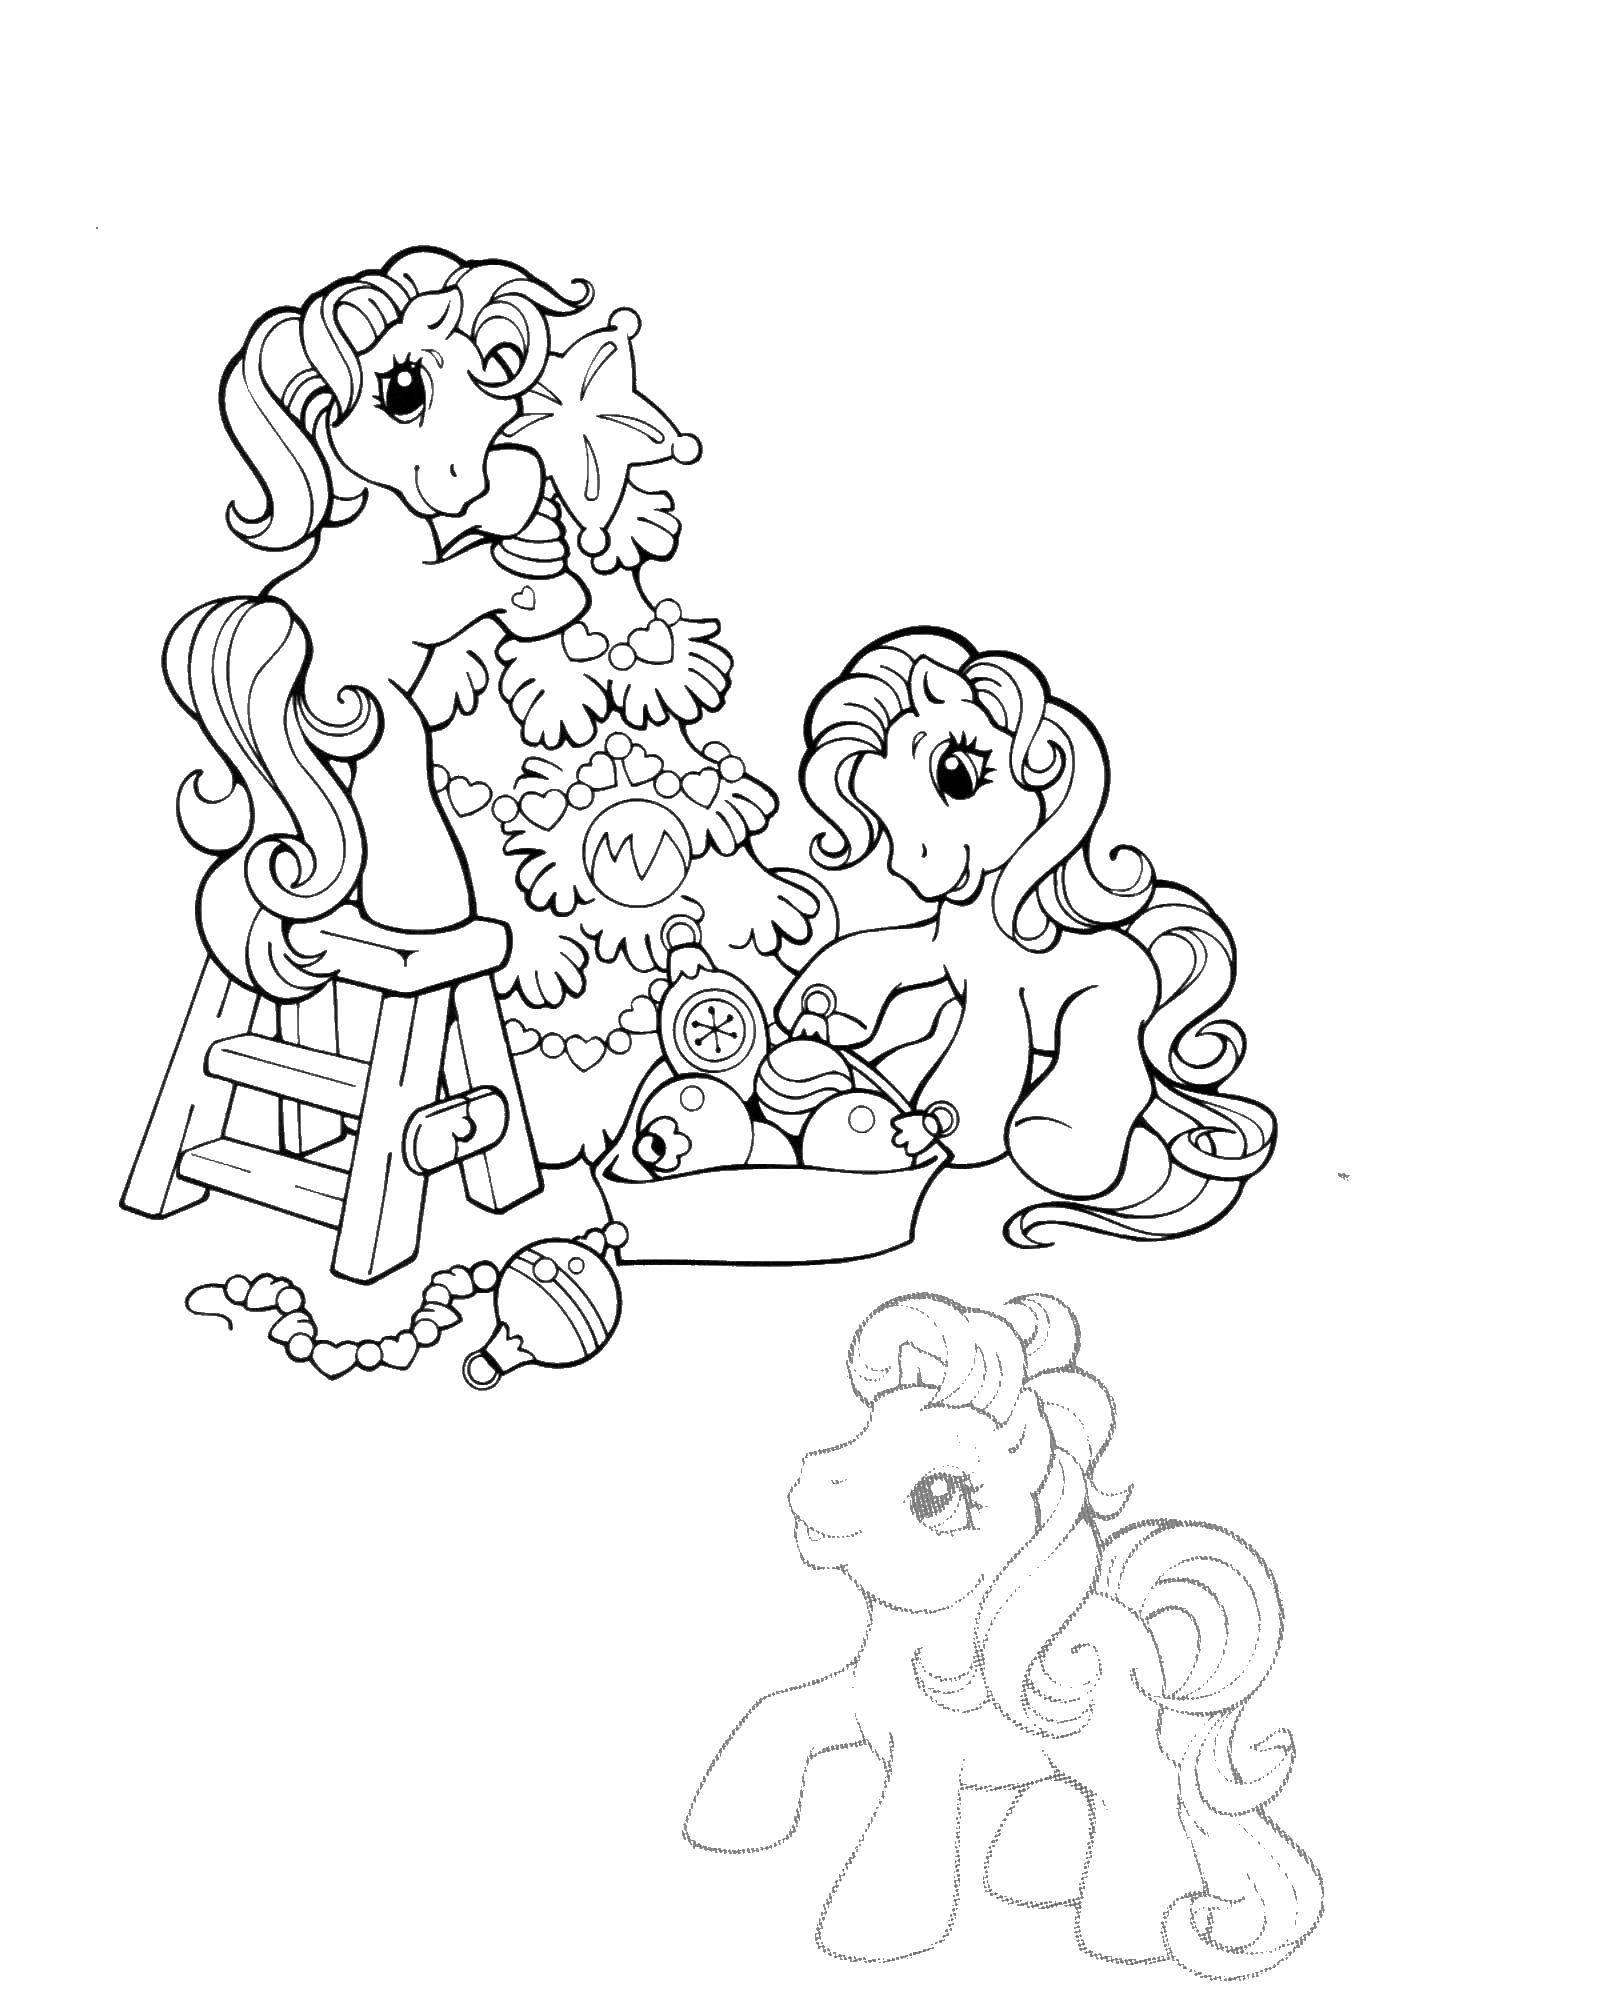 Coloring Pony decorating the Christmas tree. Category Ponies. Tags:  pony, unicorn.